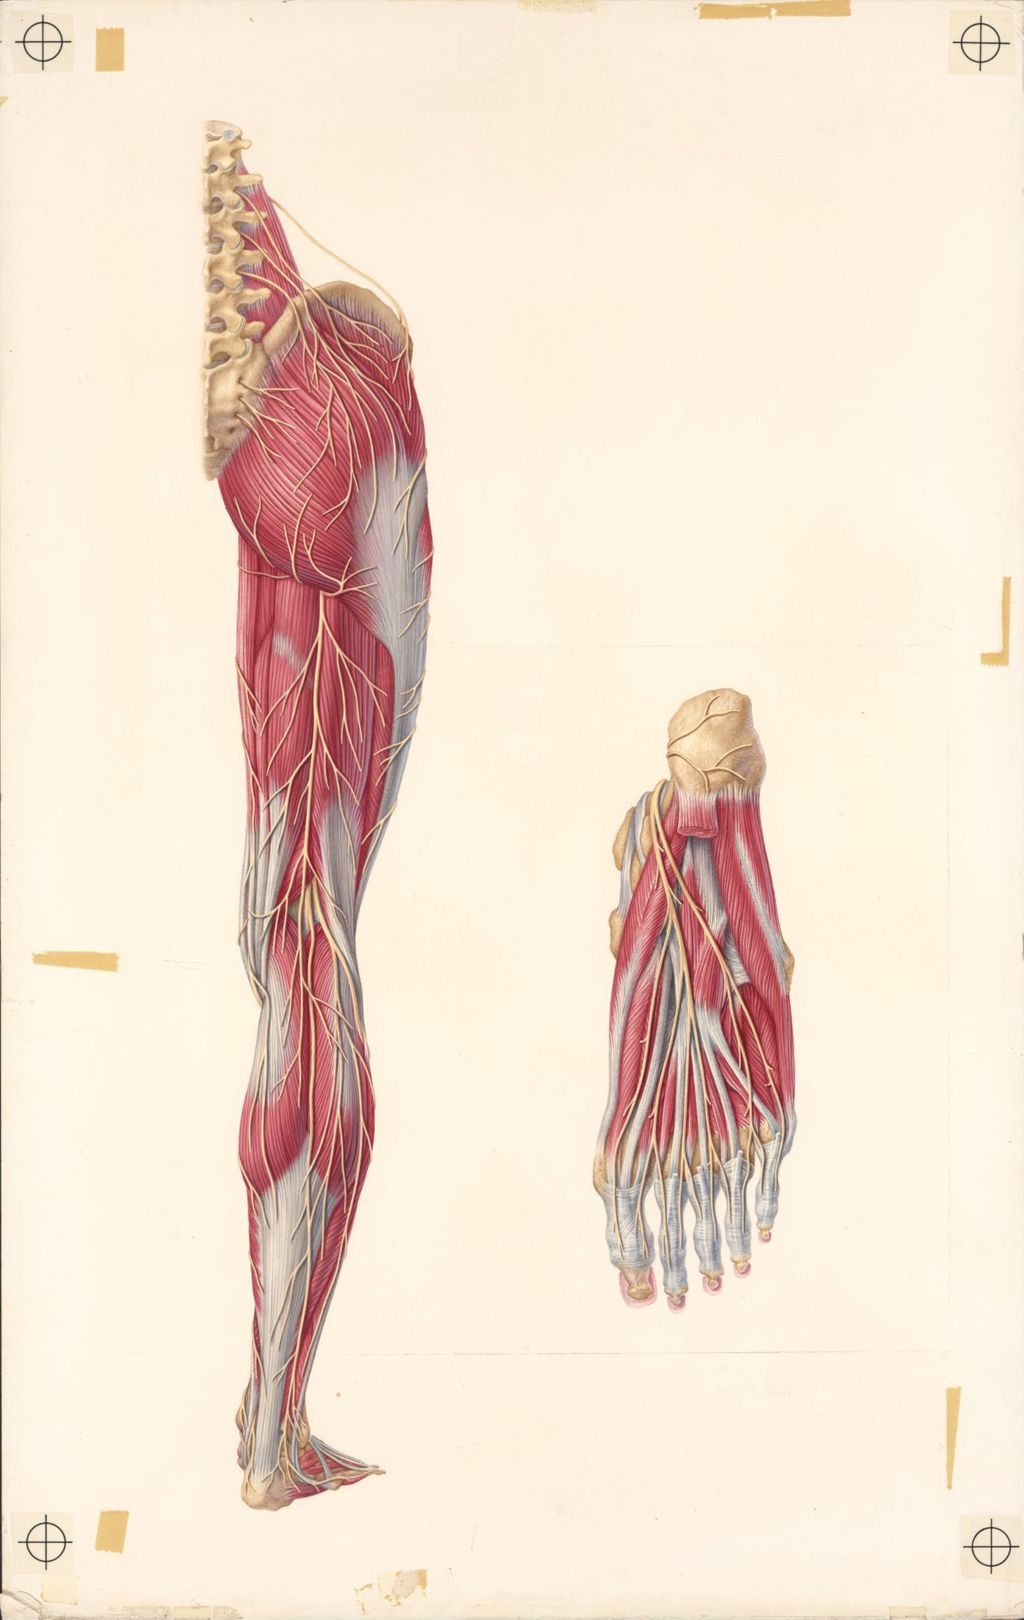 Miniature of Doctor-Patient Explanatory Atlas of Anatomy, The Cutaneous Nerves of the lower limb superimposed on the musculature, Plate II